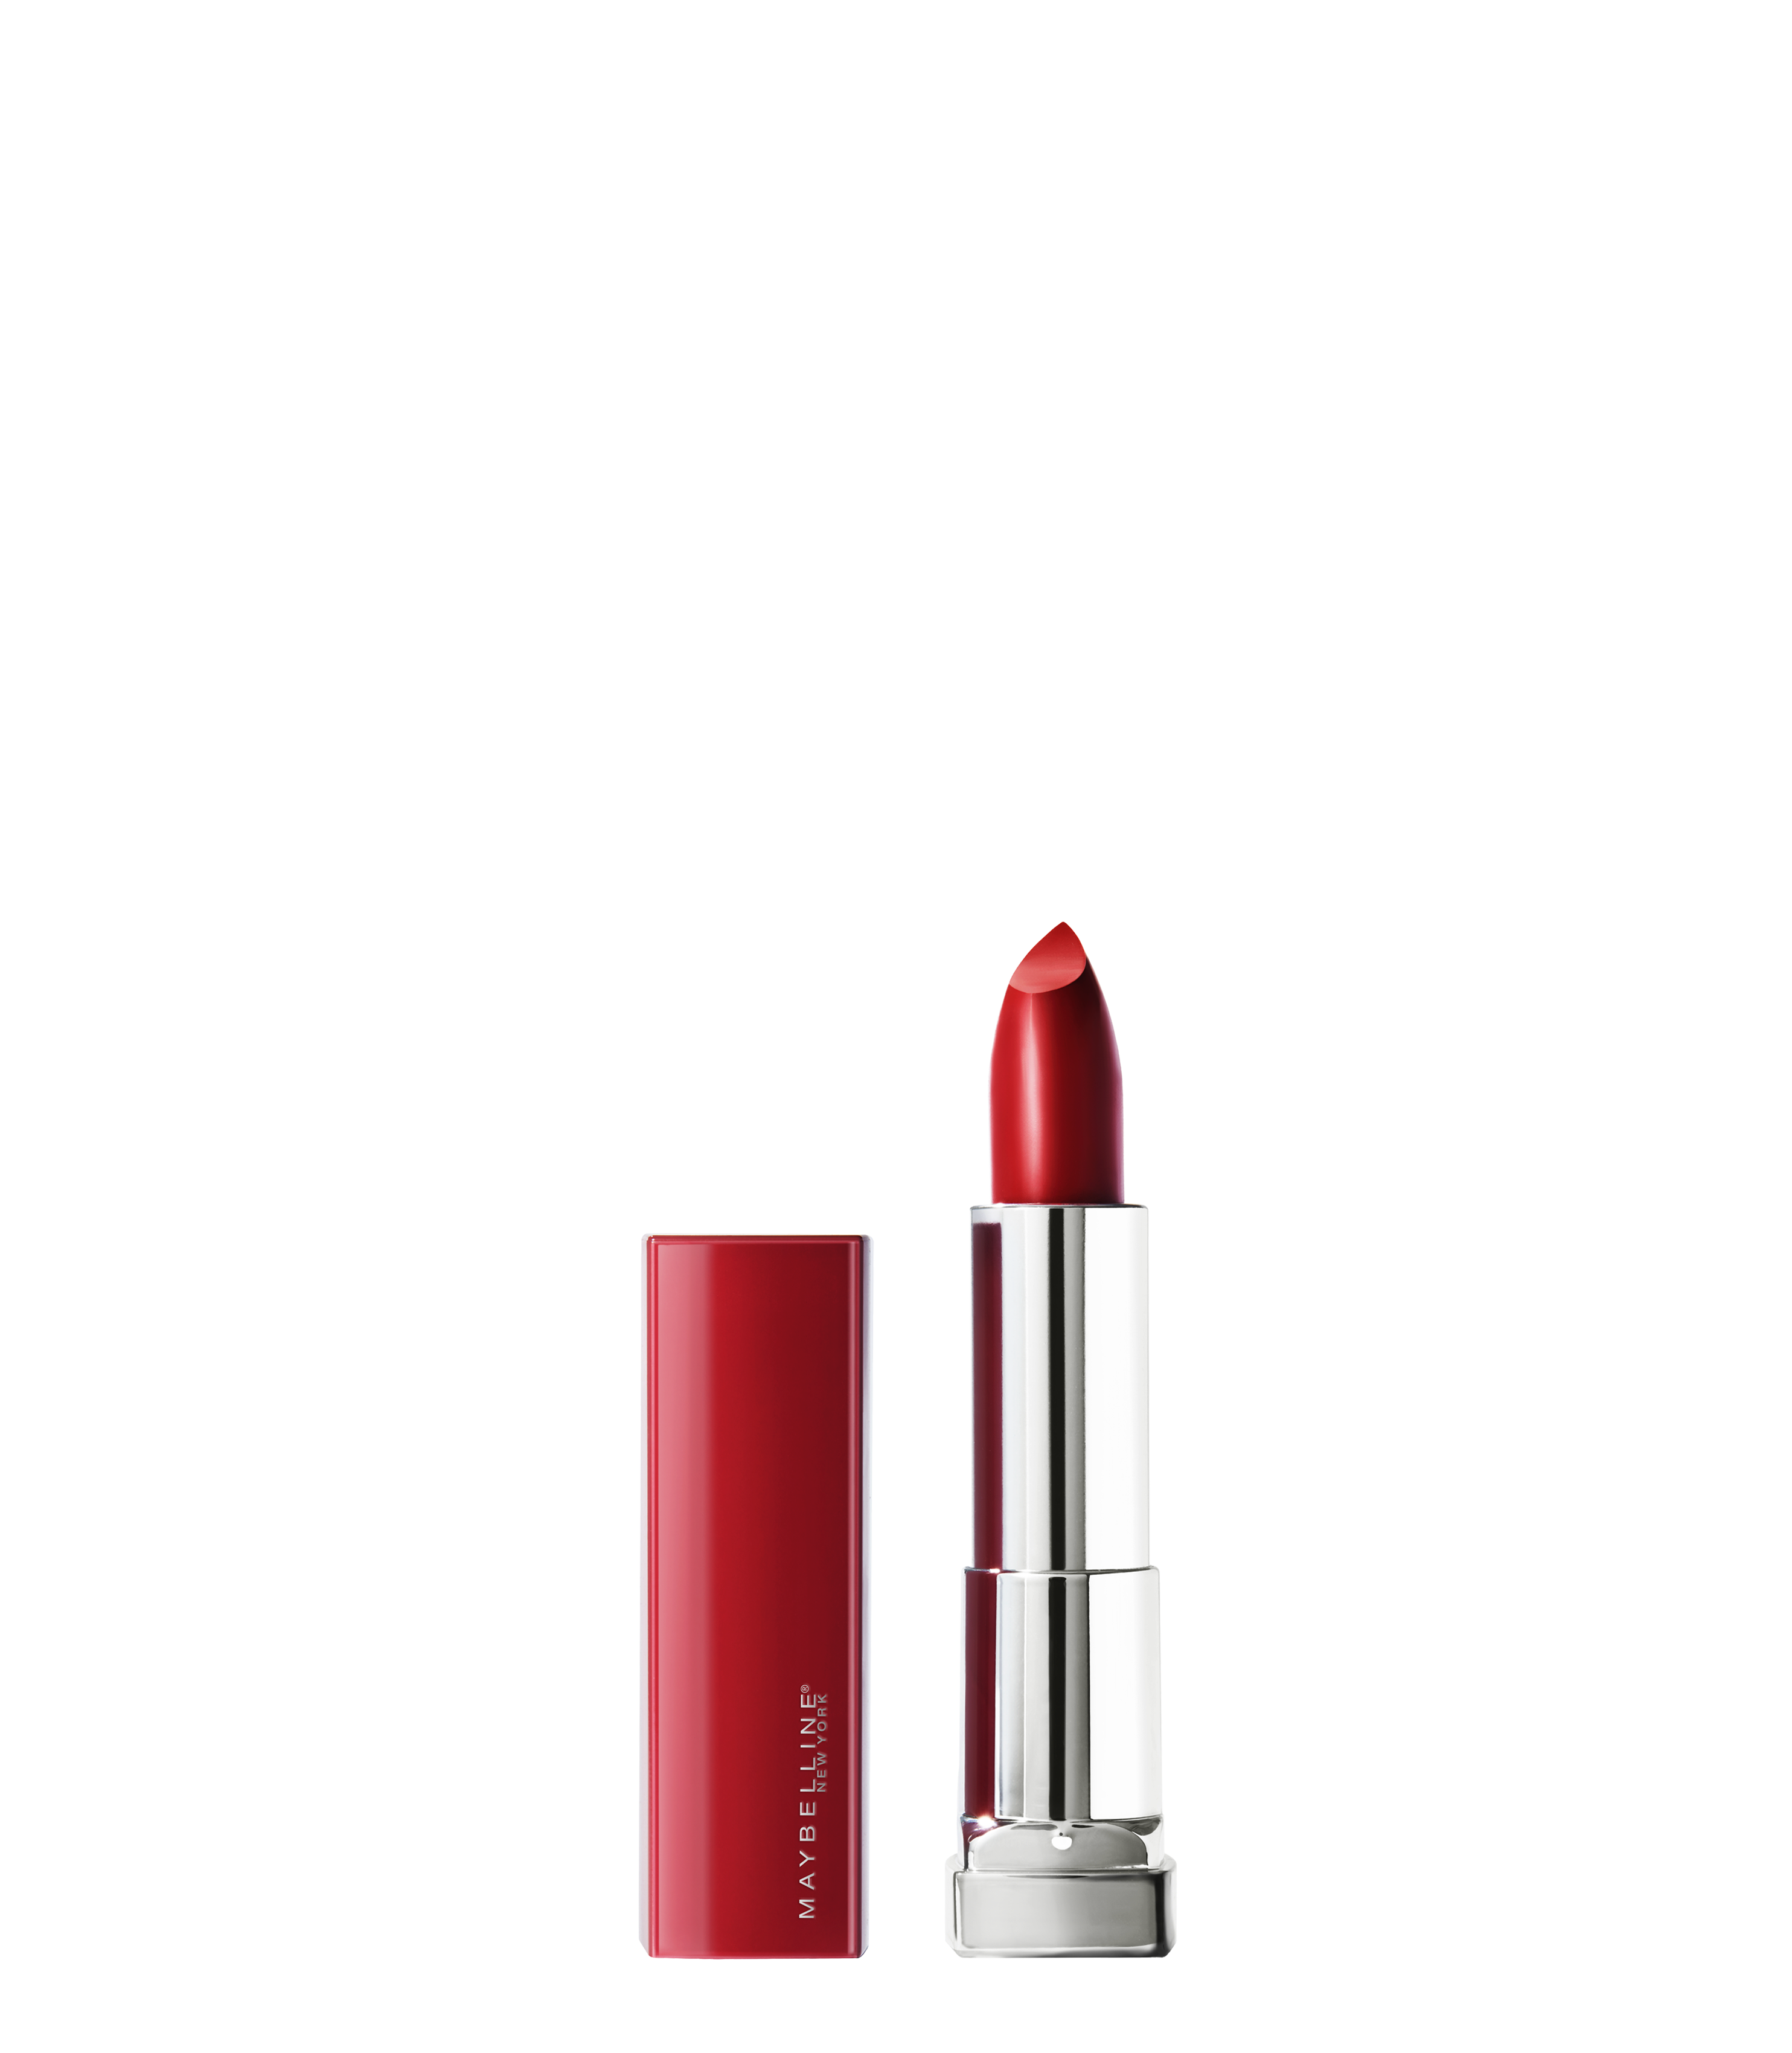 Labial CS Maybelline Made for Me Rojos